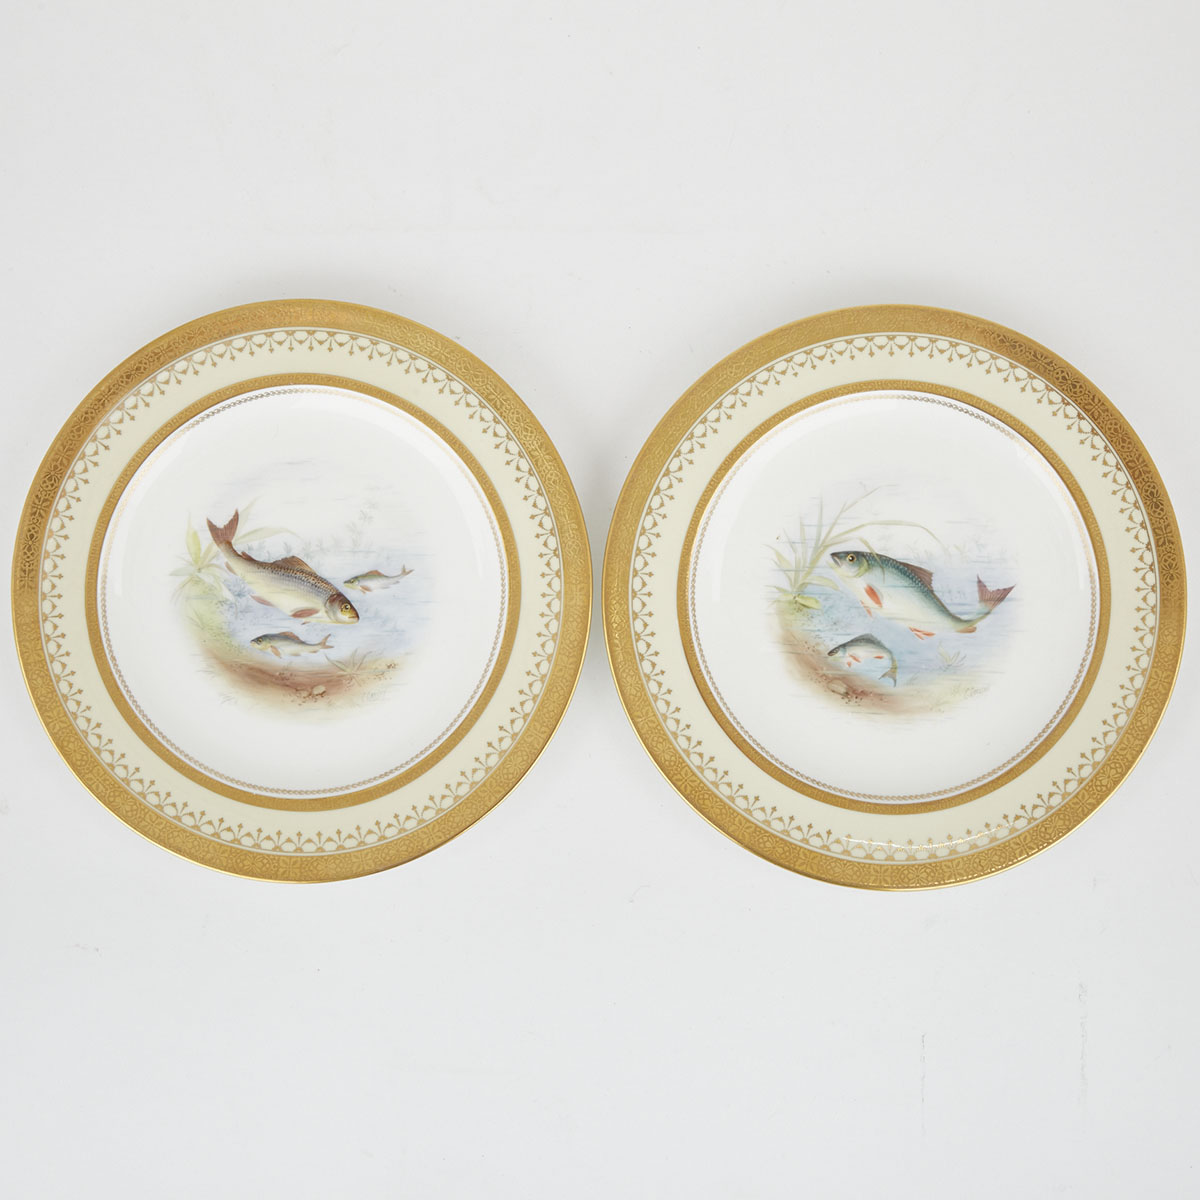 Pair of Royal Crown Derby Fish Plates, ‘Roach’ and ‘Rudd’, Cuthbert Gresley, 1910